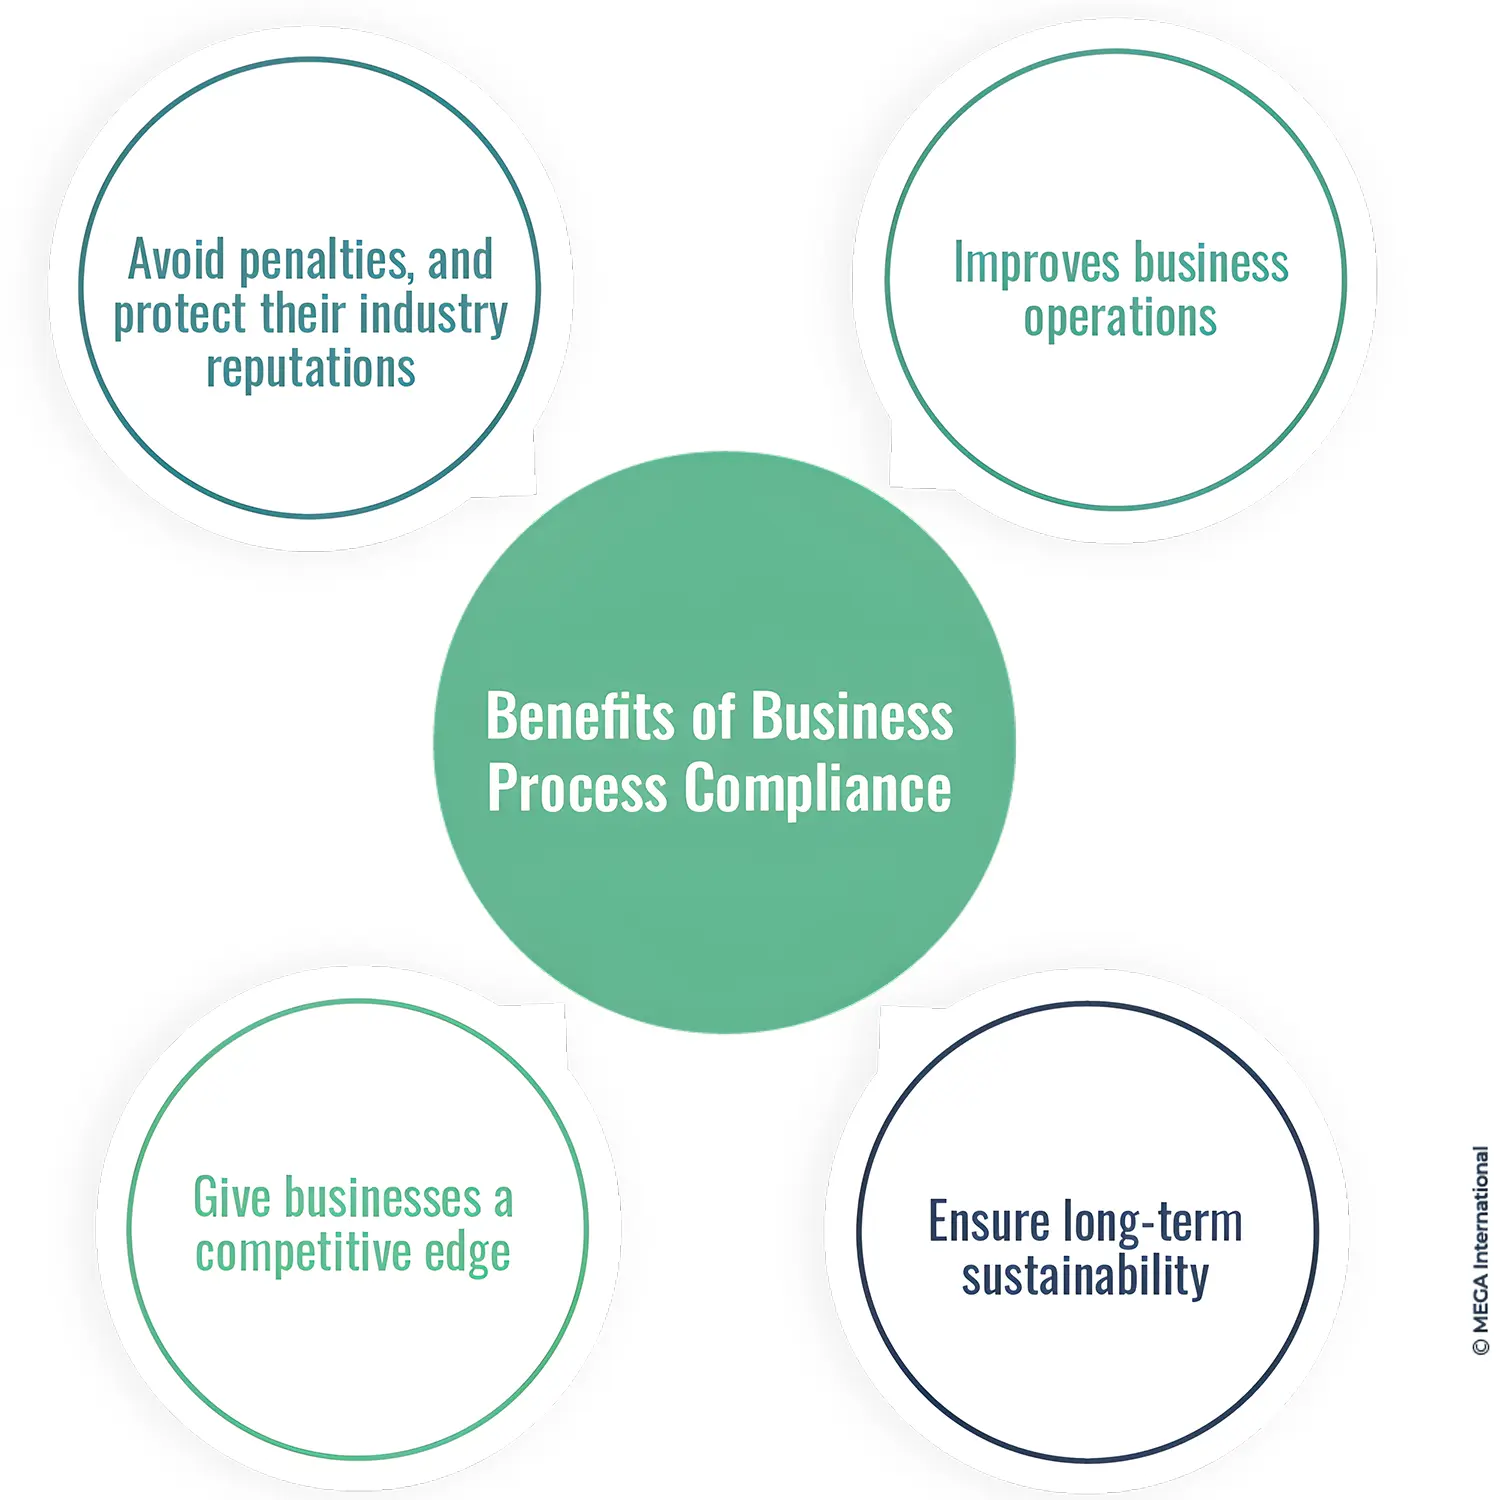 Benefits of Business Process Compliance